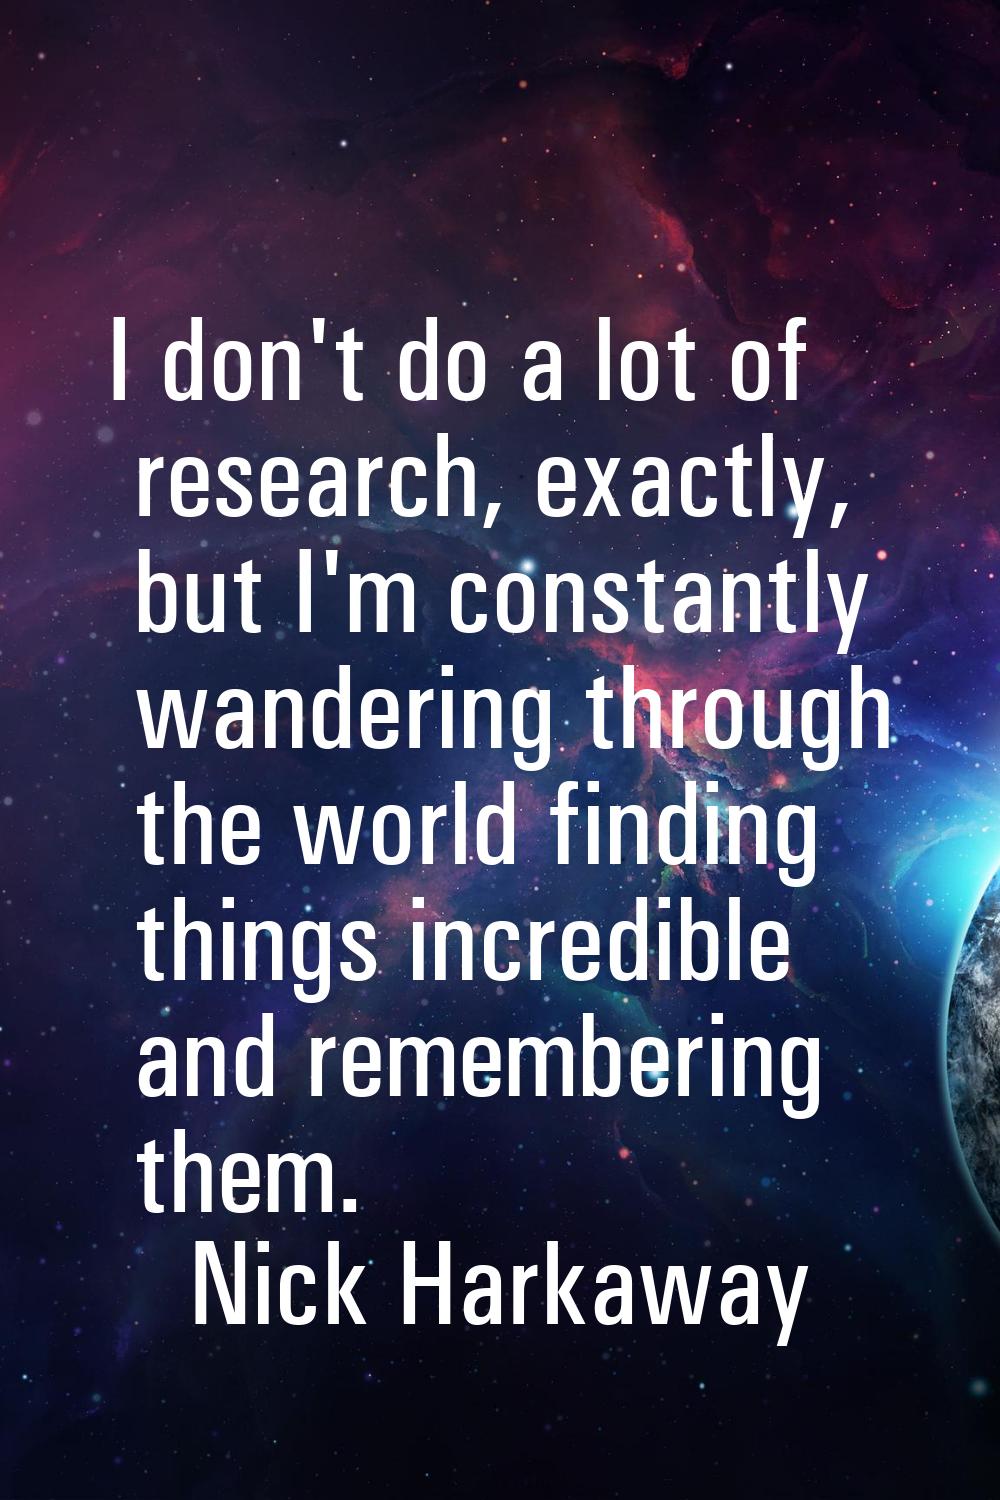 I don't do a lot of research, exactly, but I'm constantly wandering through the world finding thing